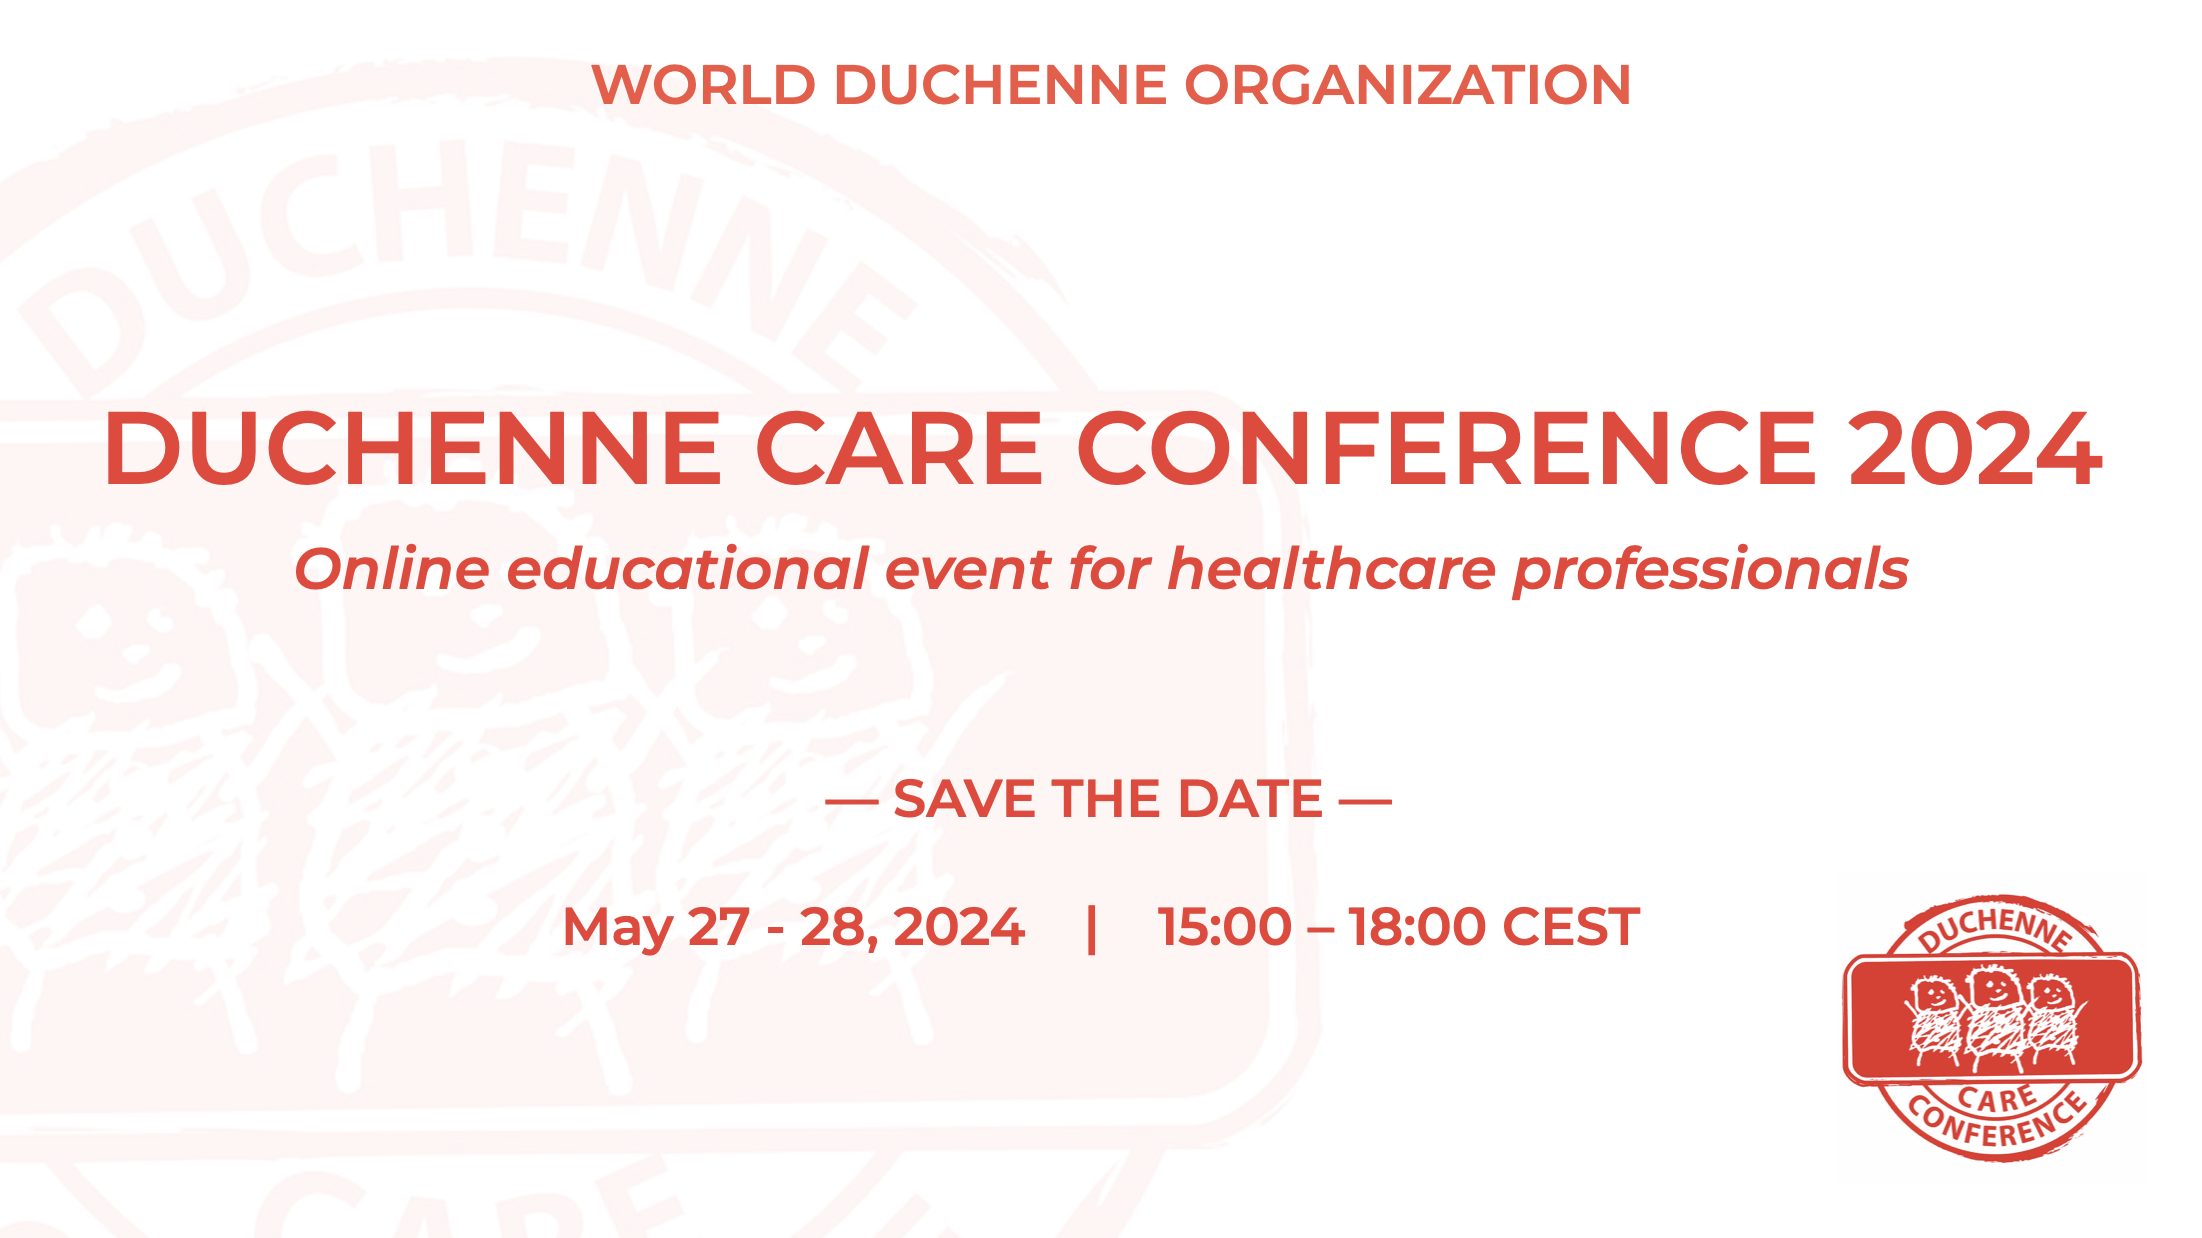 Duchenne Care Conference 2024 - Save the date